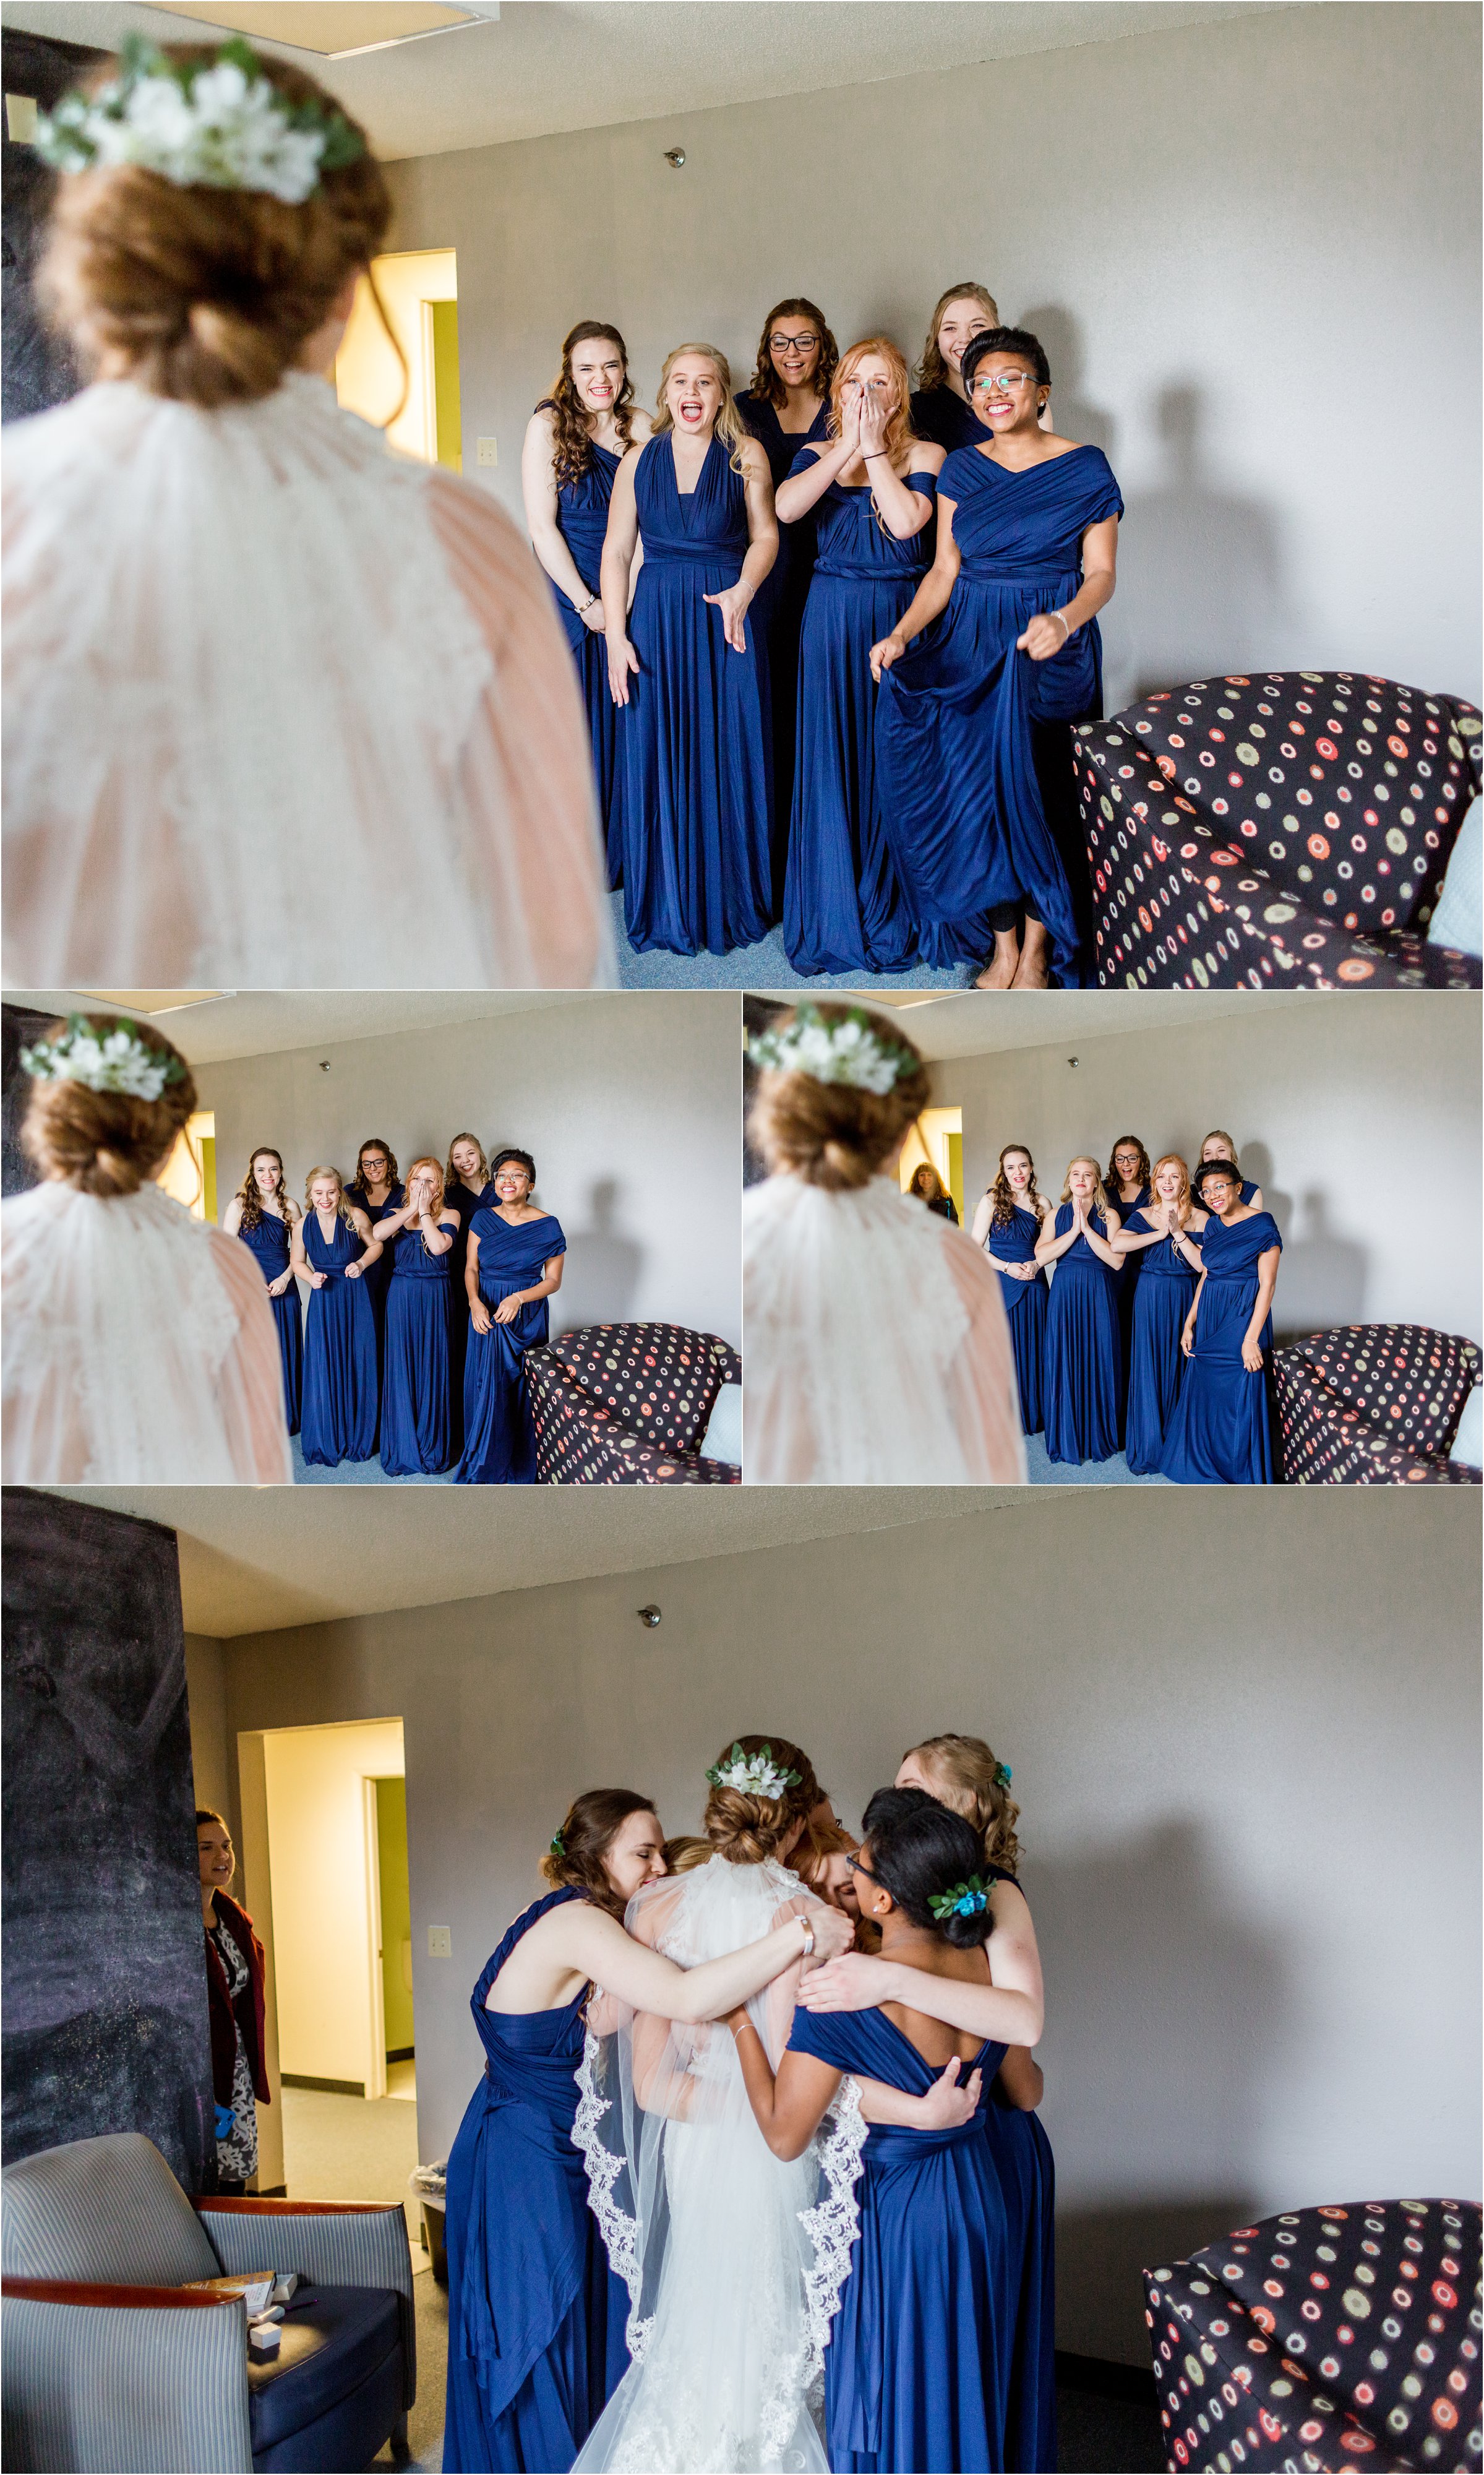 bridesmaids seeing bride all dressed up in her wedding dress for the first time